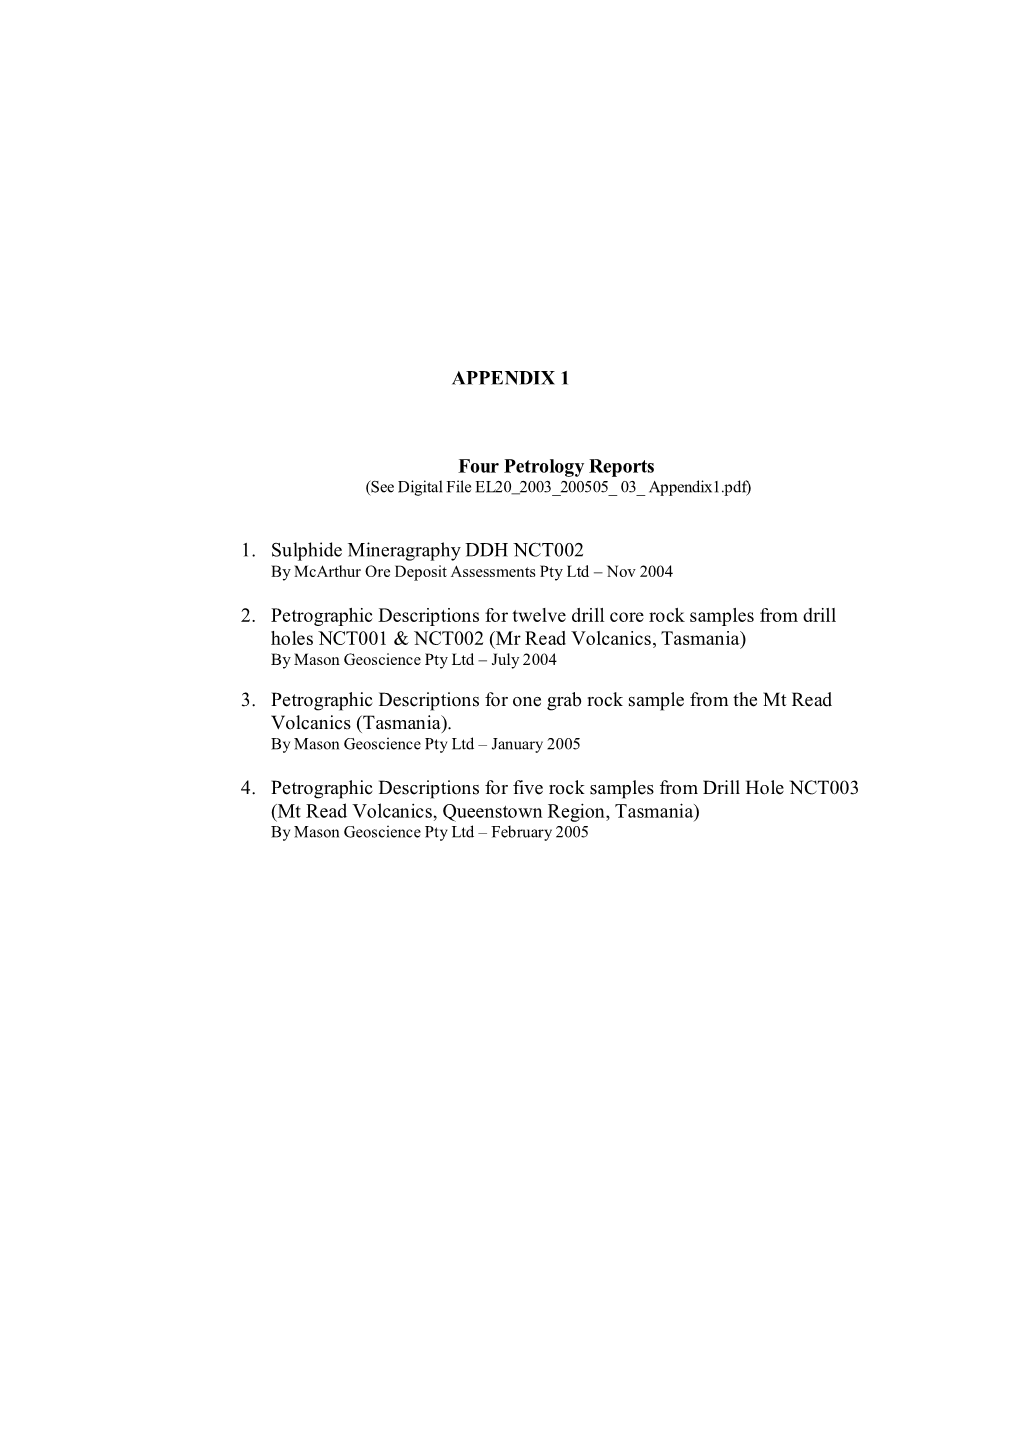 APPENDIX 1 Four Petrology Reports 1. Sulphide Mineragraphy DDH